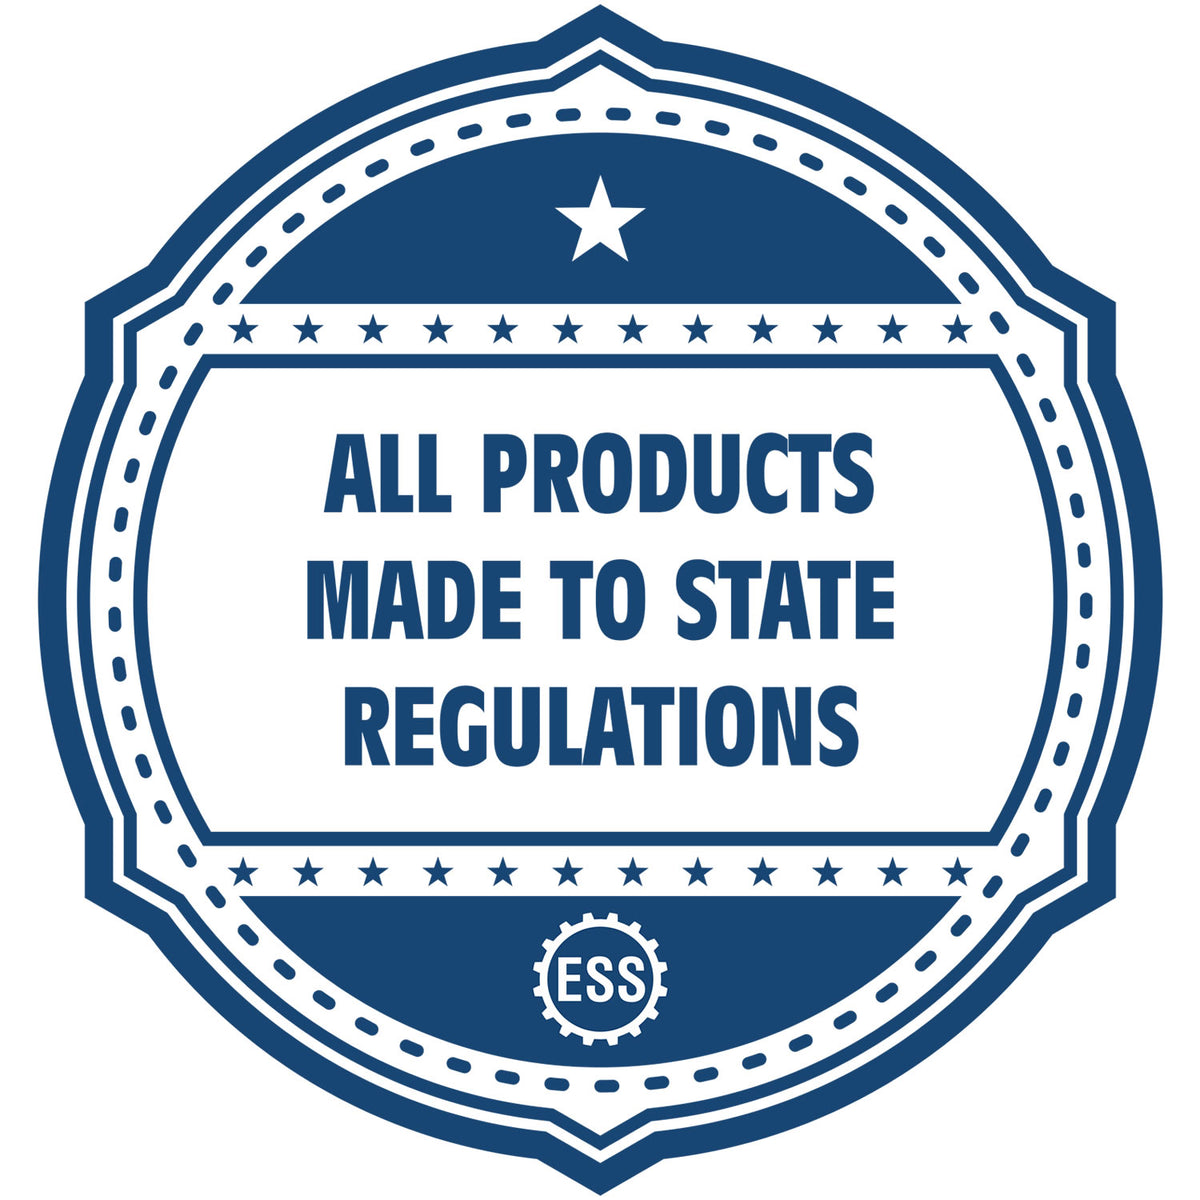 An icon or badge element for the State of Minnesota Soft Land Surveyor Embossing Seal showing that this product is made in compliance with state regulations.